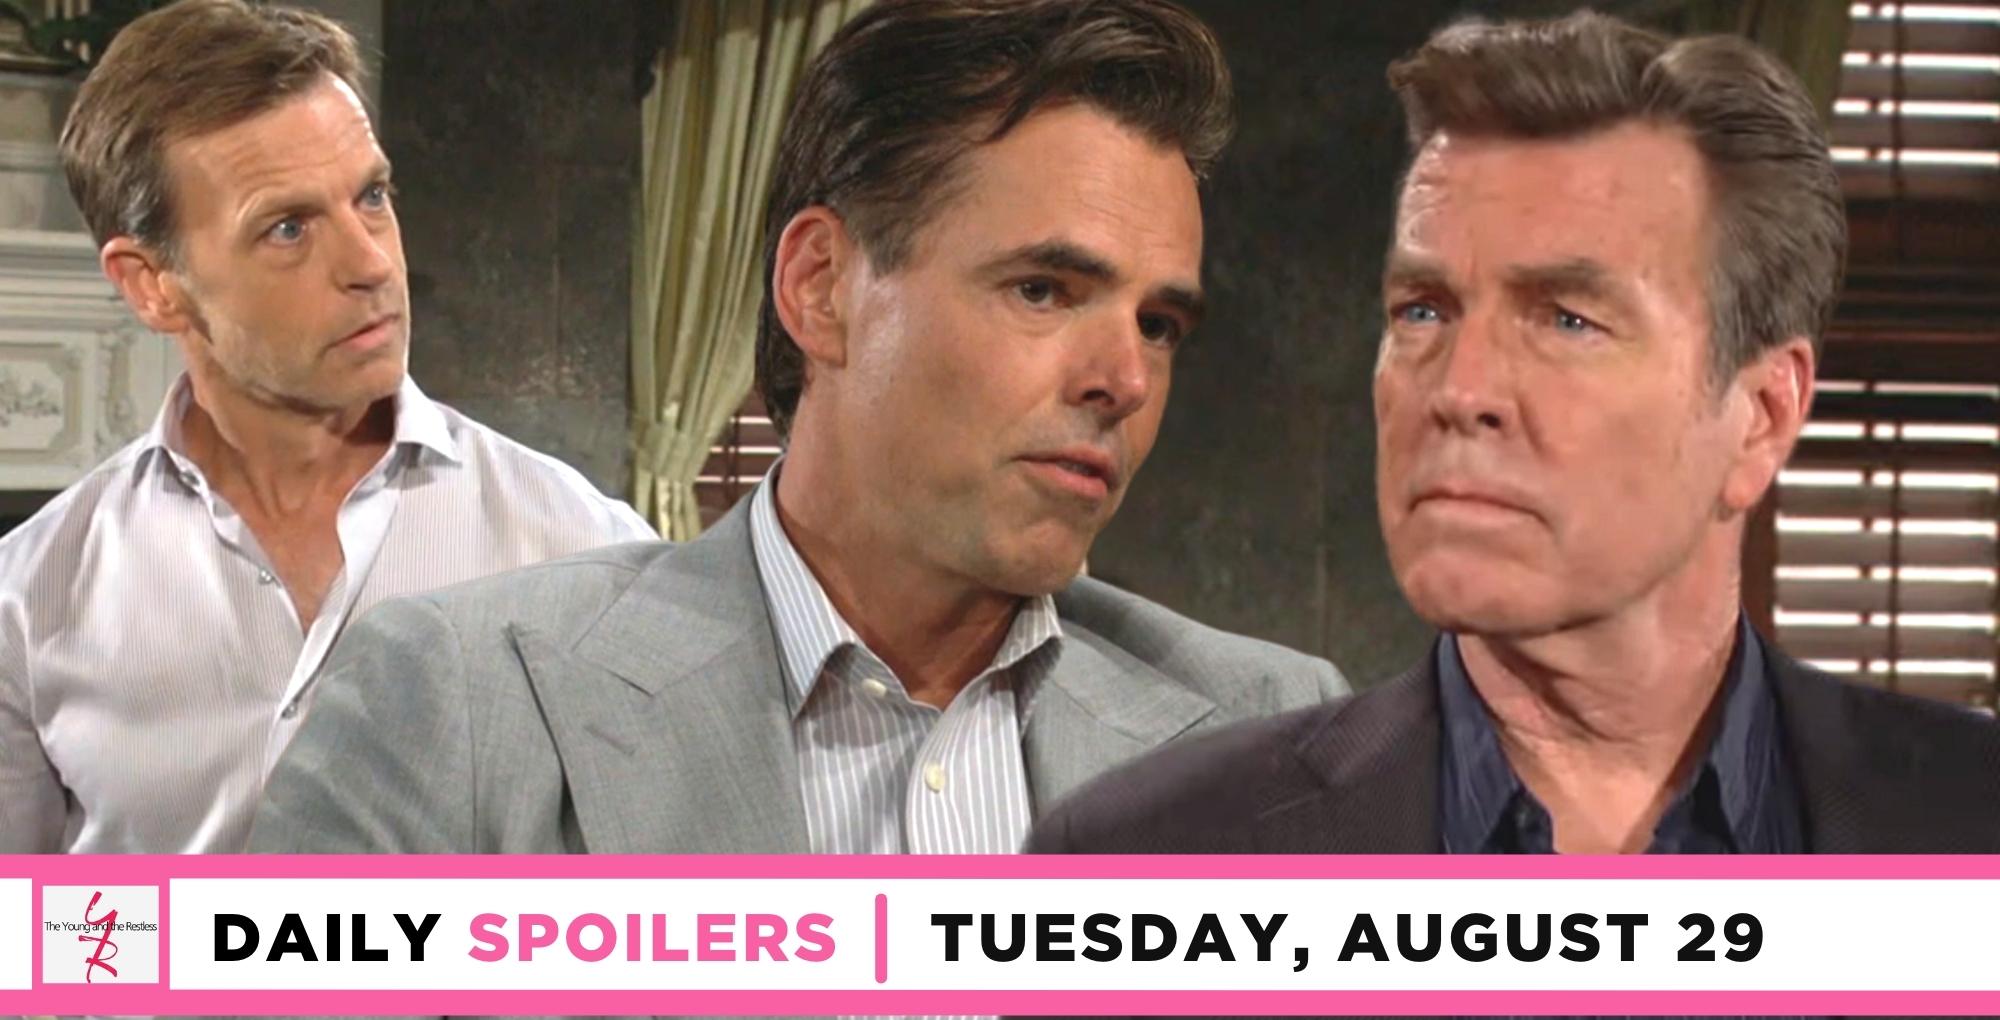 young and the restless spoilers for tuesday, august 29, 2023 feature tucker, billy, and jack.